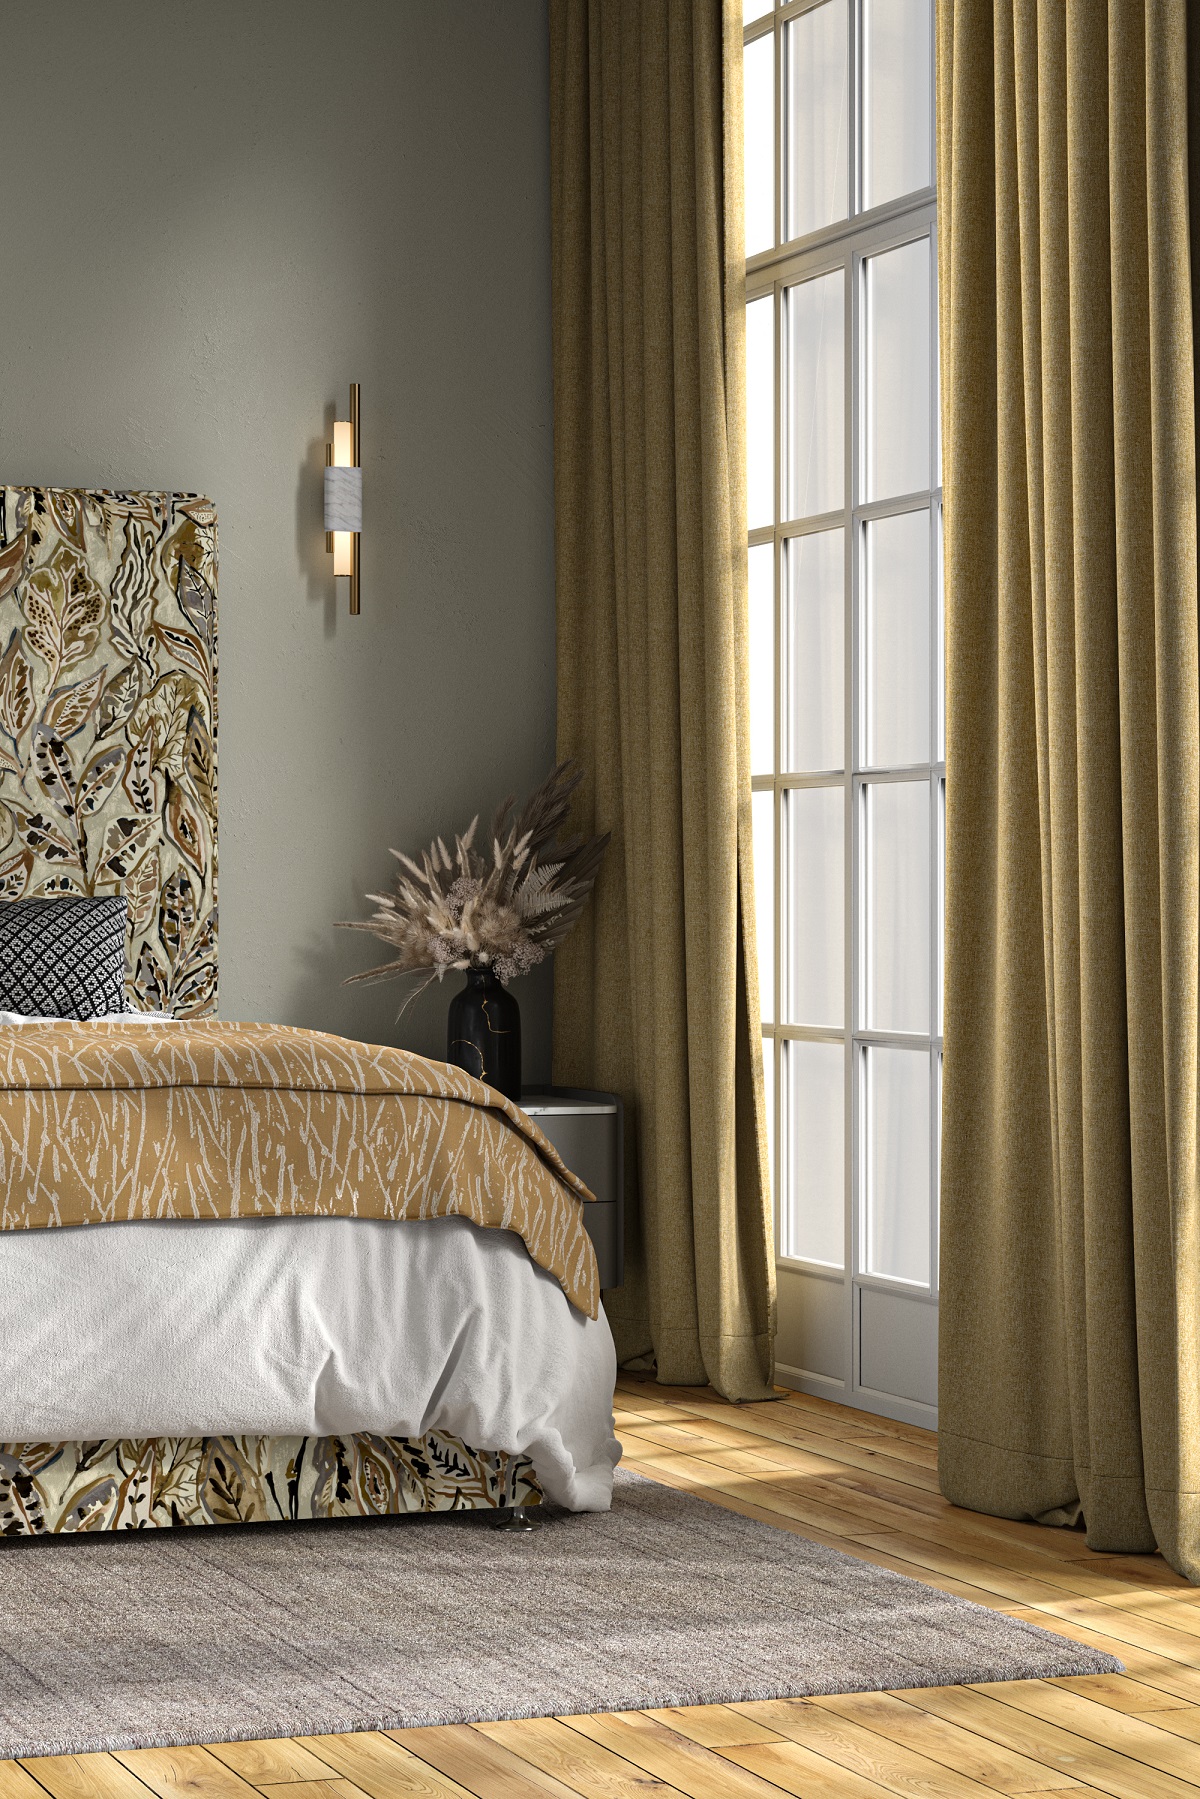 headboard covered in fabric inspired by nature with leaf design in a gold and grey bedroom scheme